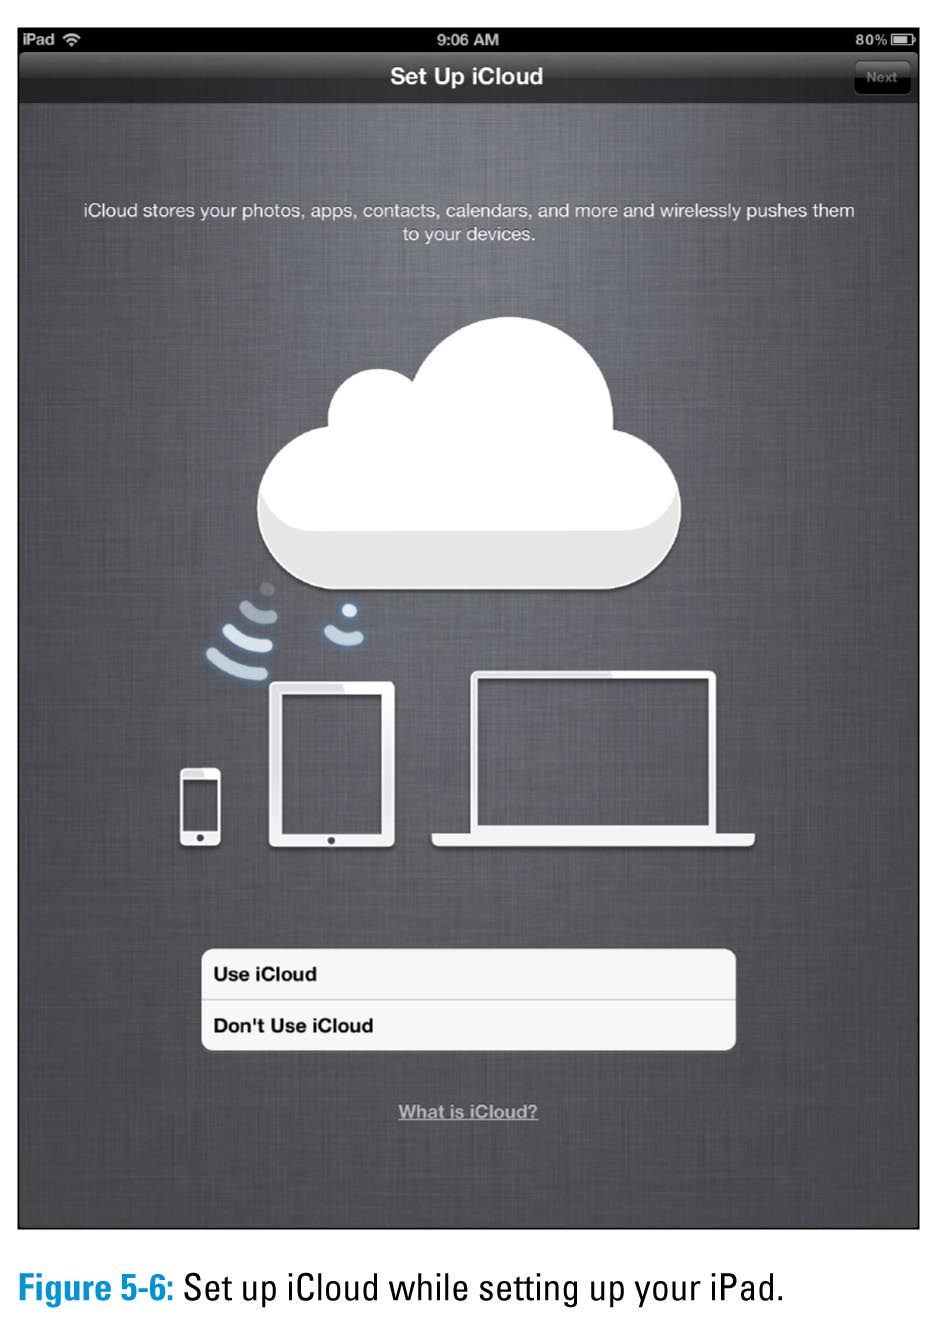 Best ipad apps, tips and tricks: How Do I Set Up iCloud On iPad